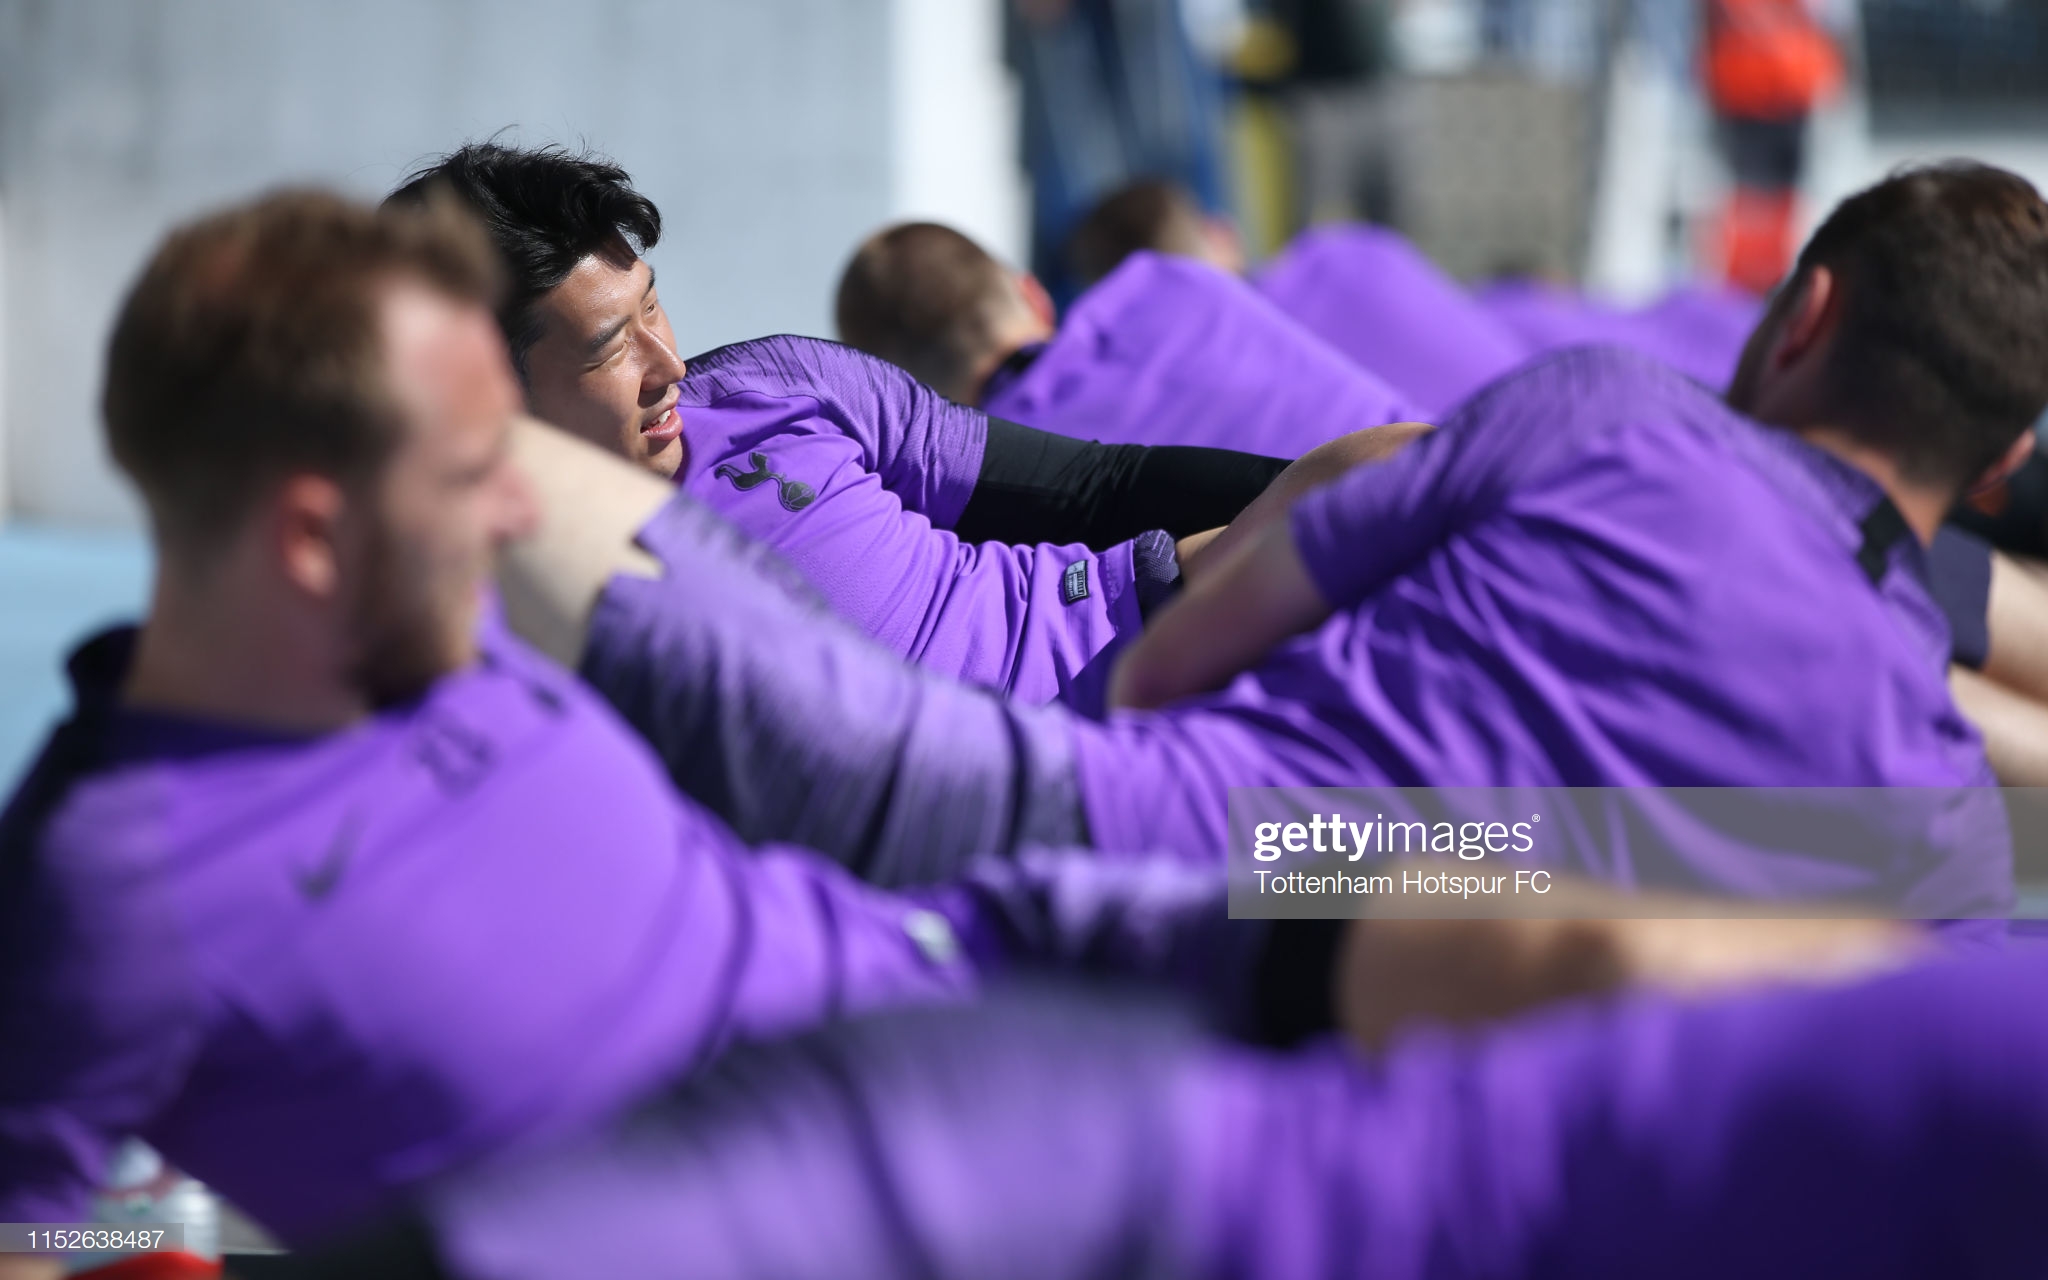 gettyimages-1152638487-2048x2048.jpg